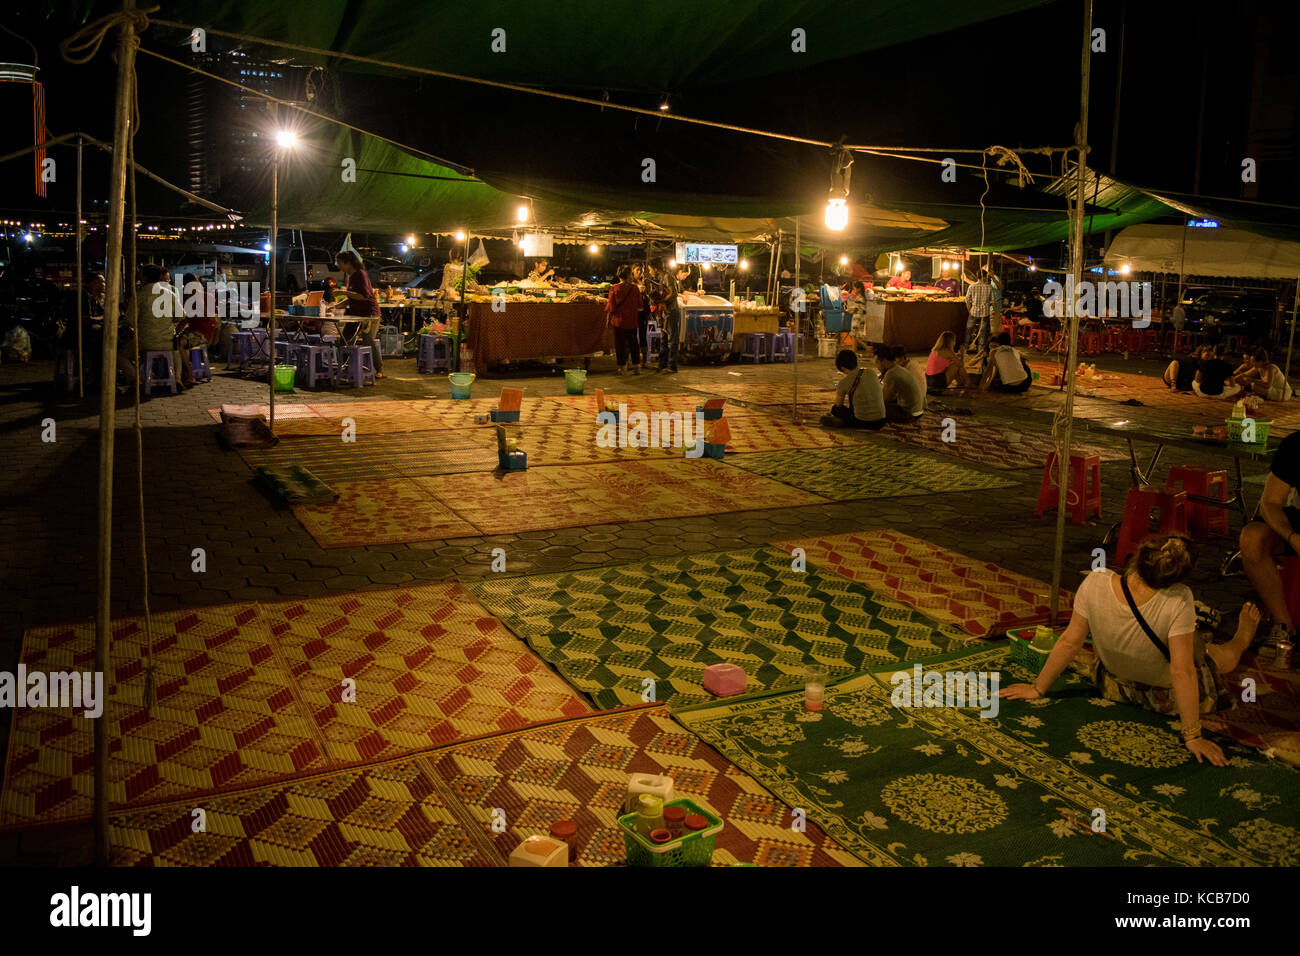 The street food area at Phnom Penh night market, where customers of food stalls can eat and dine in a chilling area with carpets and tent shelter Asia Stock Photo